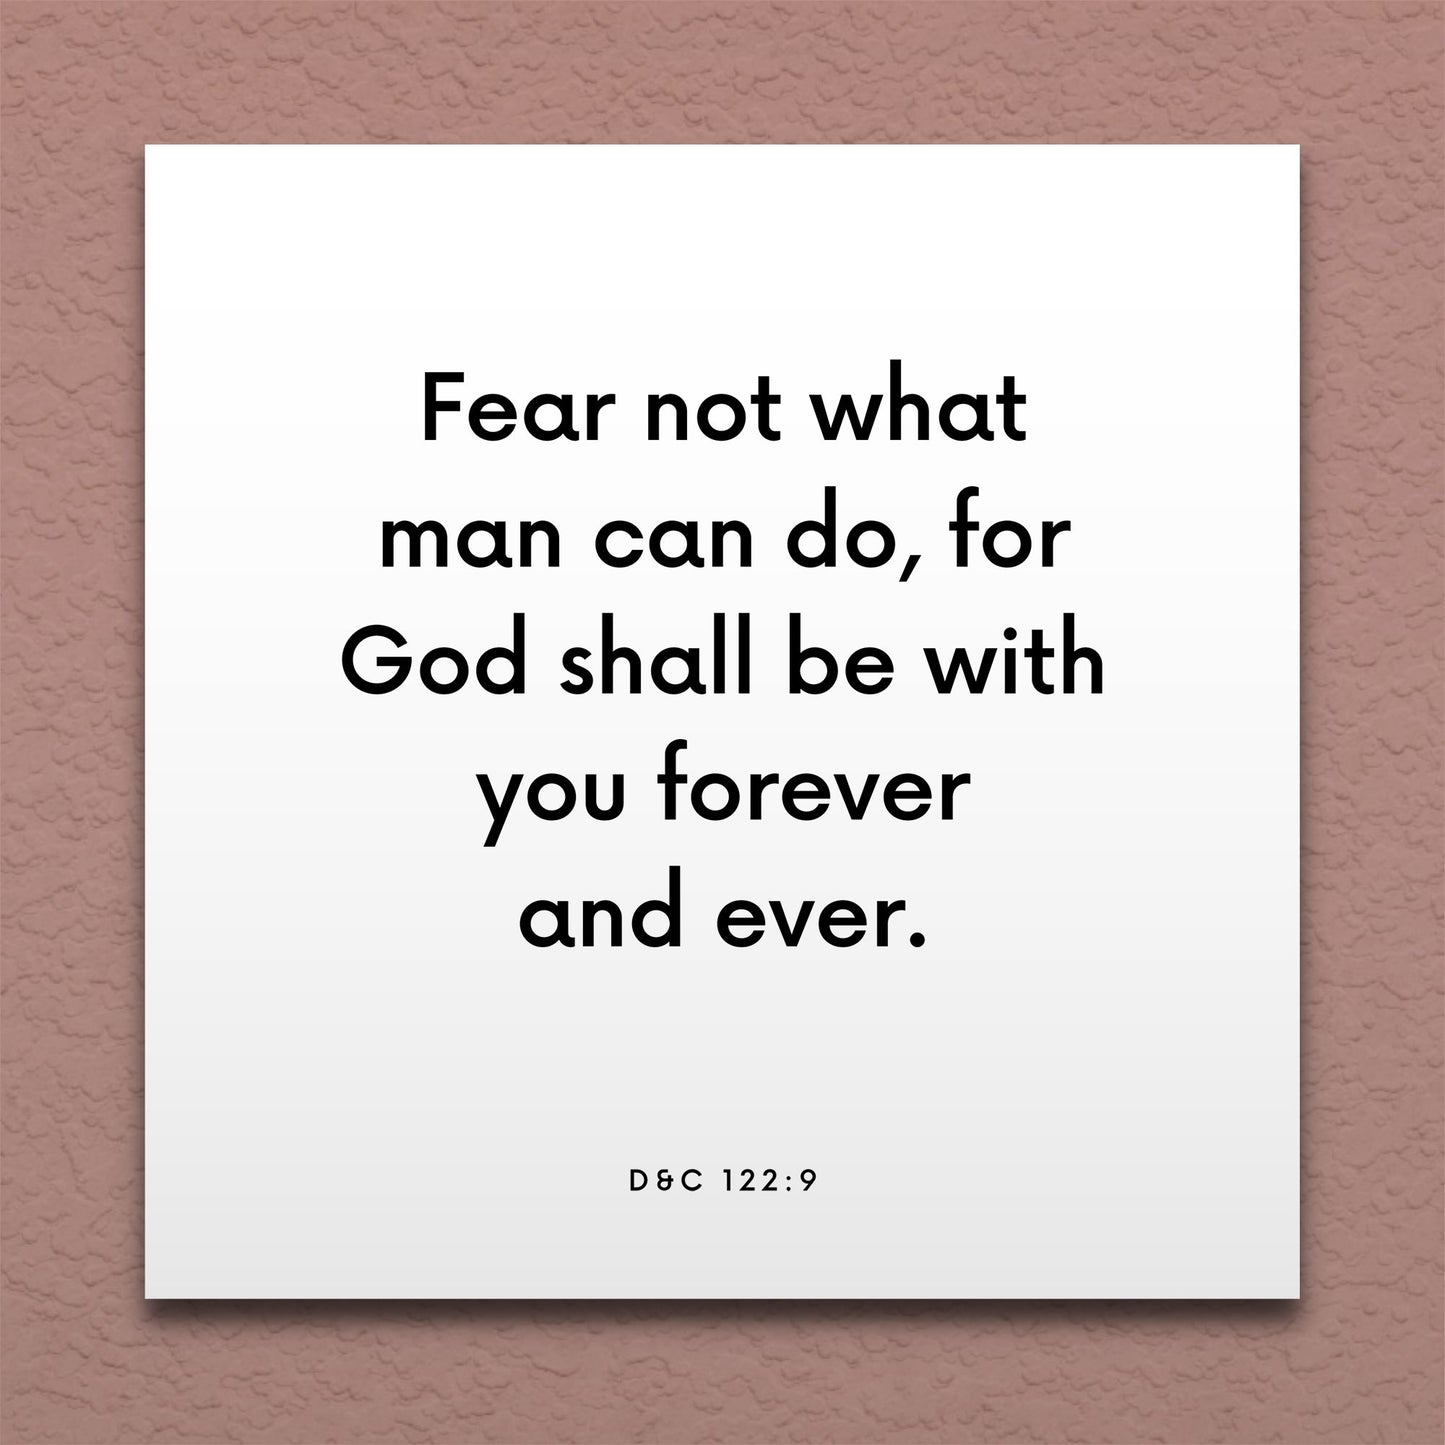 Wall-mounted scripture tile for D&C 122:9 - "Fear not what man can do"